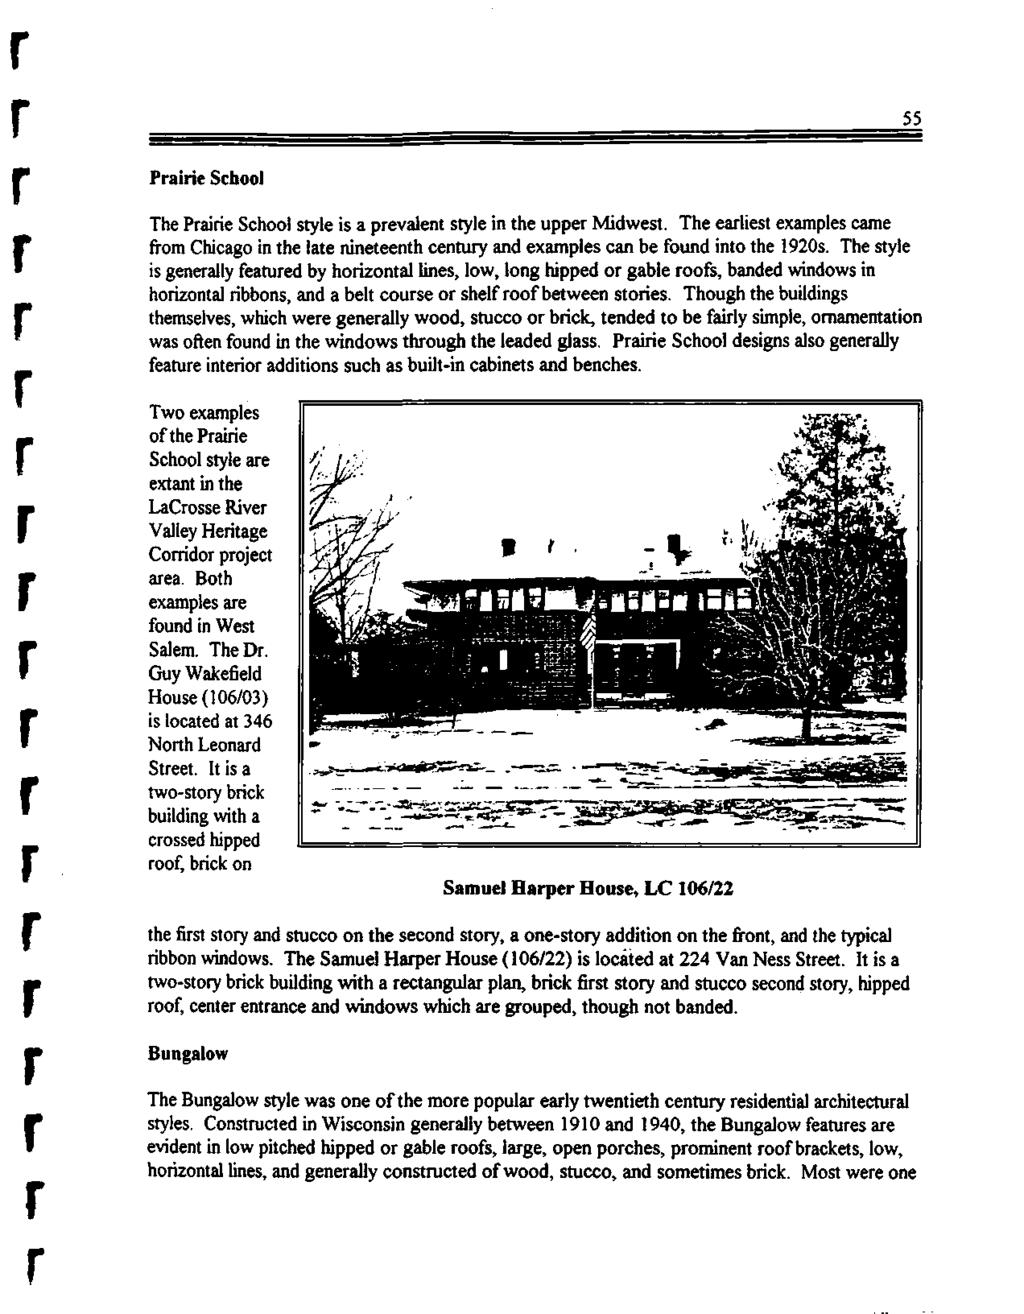 55 Paiie School The Paiie School style is a pevalent style in the uppe Midwest. The ealiest examples came fom Chicago in the late nineteenth centuy and examples can be found into the 920s.